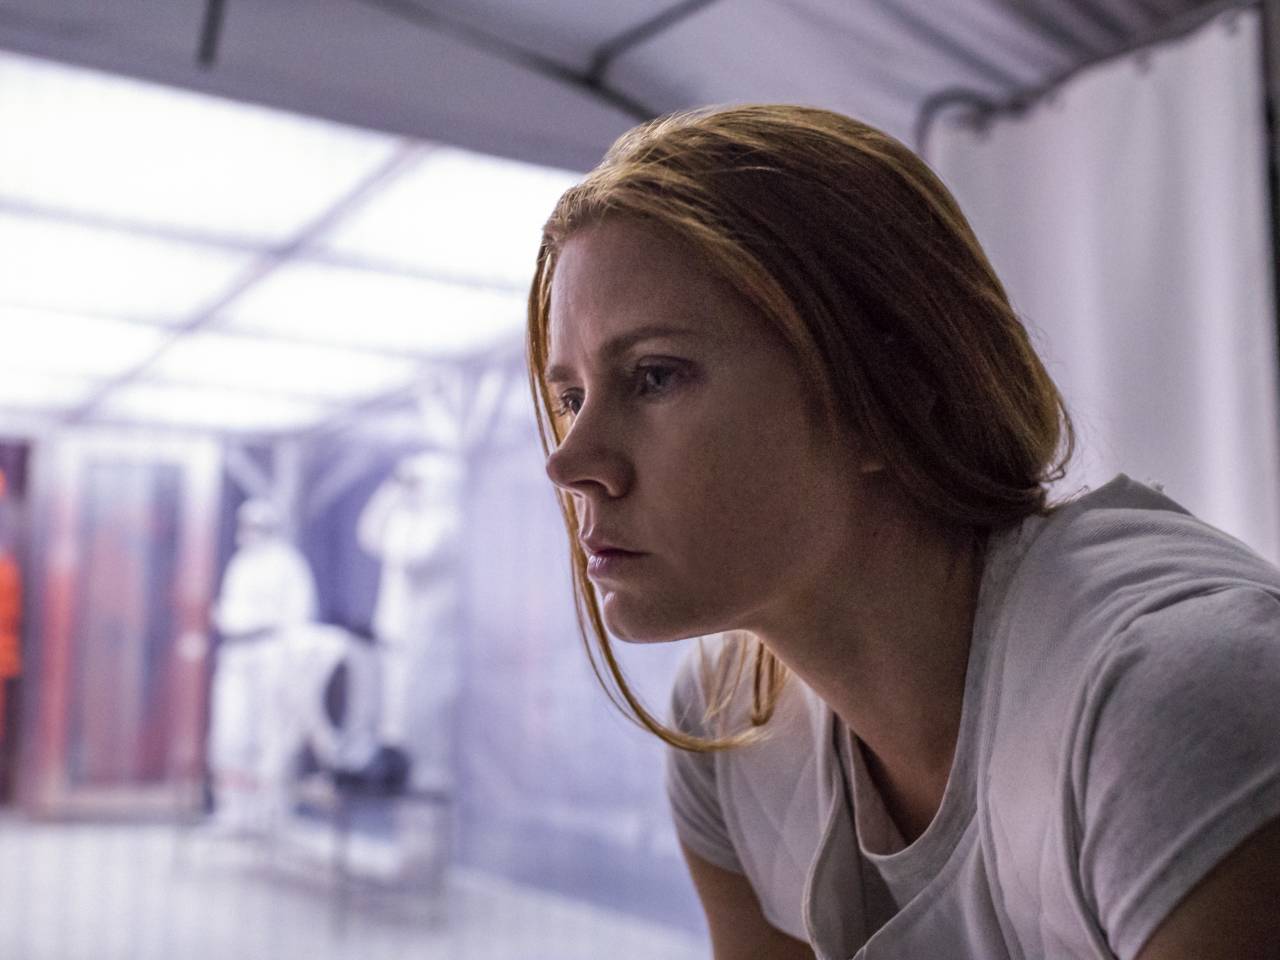 Arrival-movie-review-Amy-Adams-women-in-film